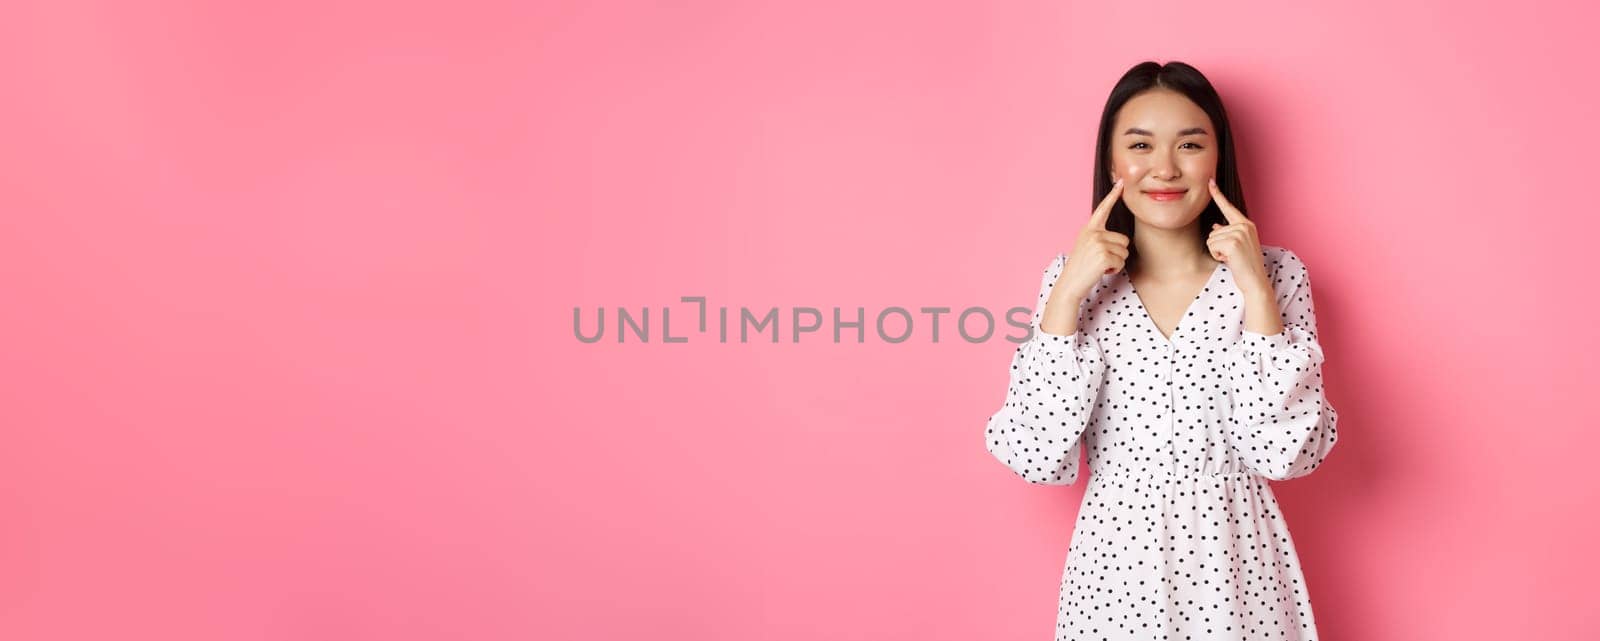 Cute blushing asian girl poking cheeks, smiling happy at camera, wearing romantic white dress, standing over pink background.